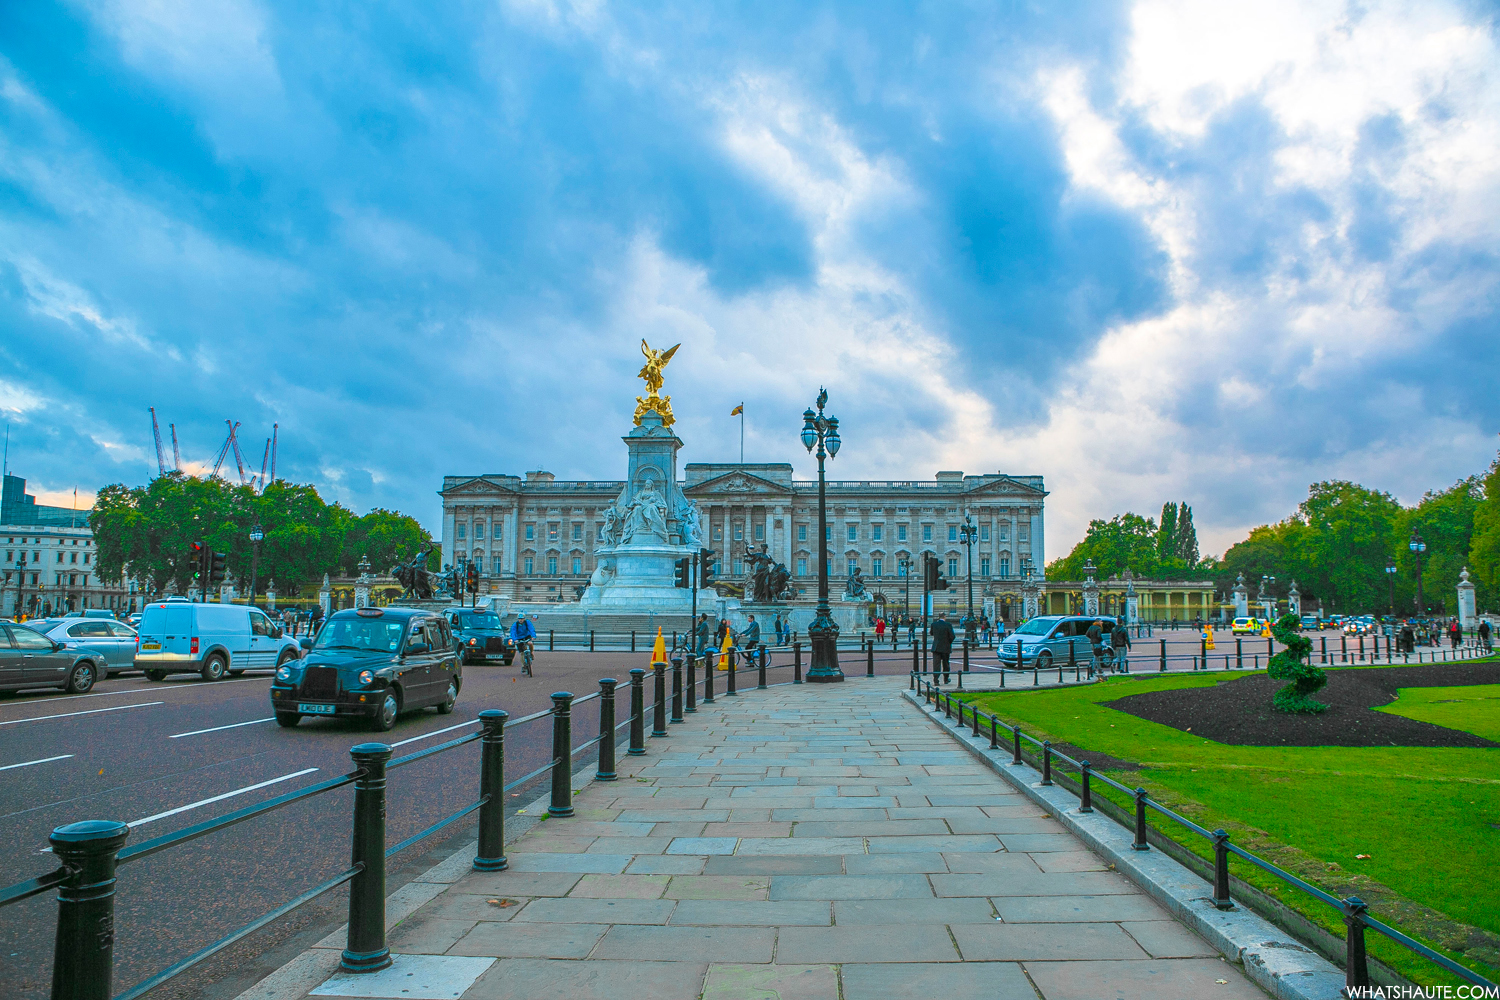 Buckingham Palace - London, England, What's Haute in the World